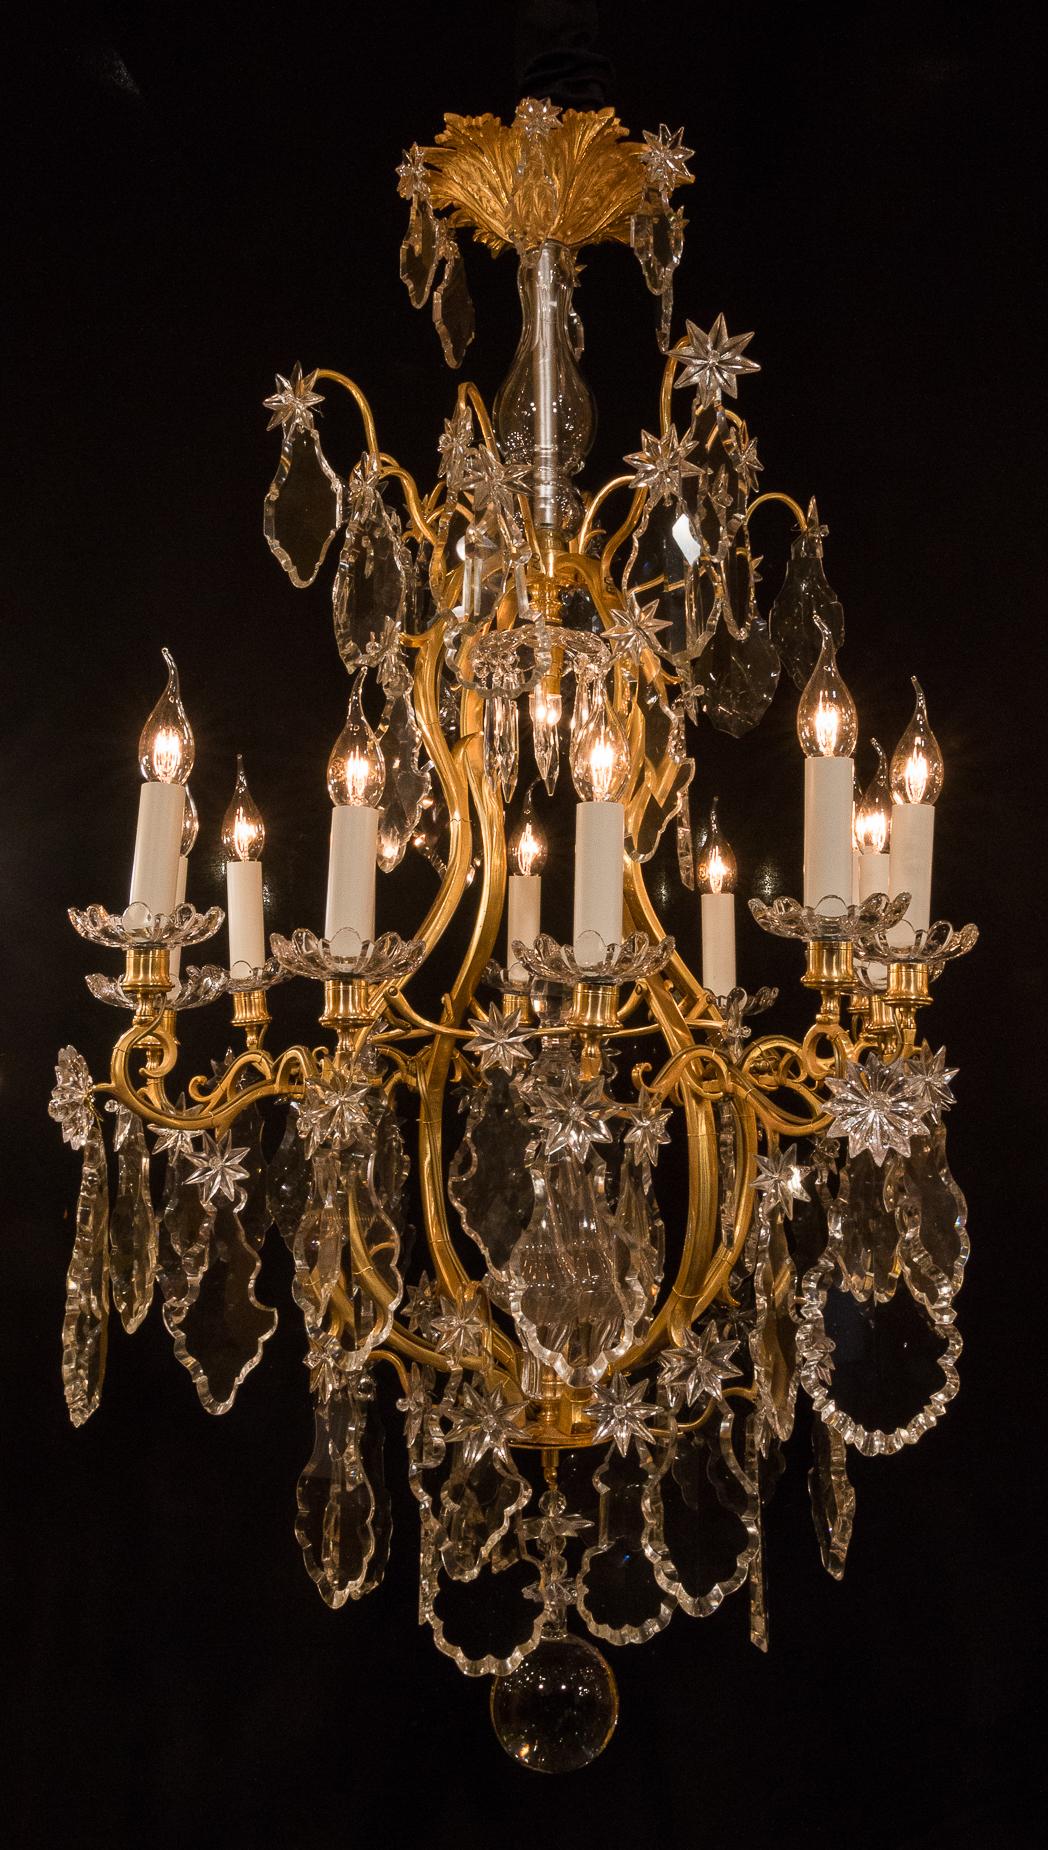 Baccarat, French Louis XV style, gilt bronze and crystal chandelier, circa 1880-1890.

Gorgeous gilt bronze and cut crystal chandelier in the Classic French Louis XV style, signed by The Cristalleries De Baccarat.
Our chandelier is composed of